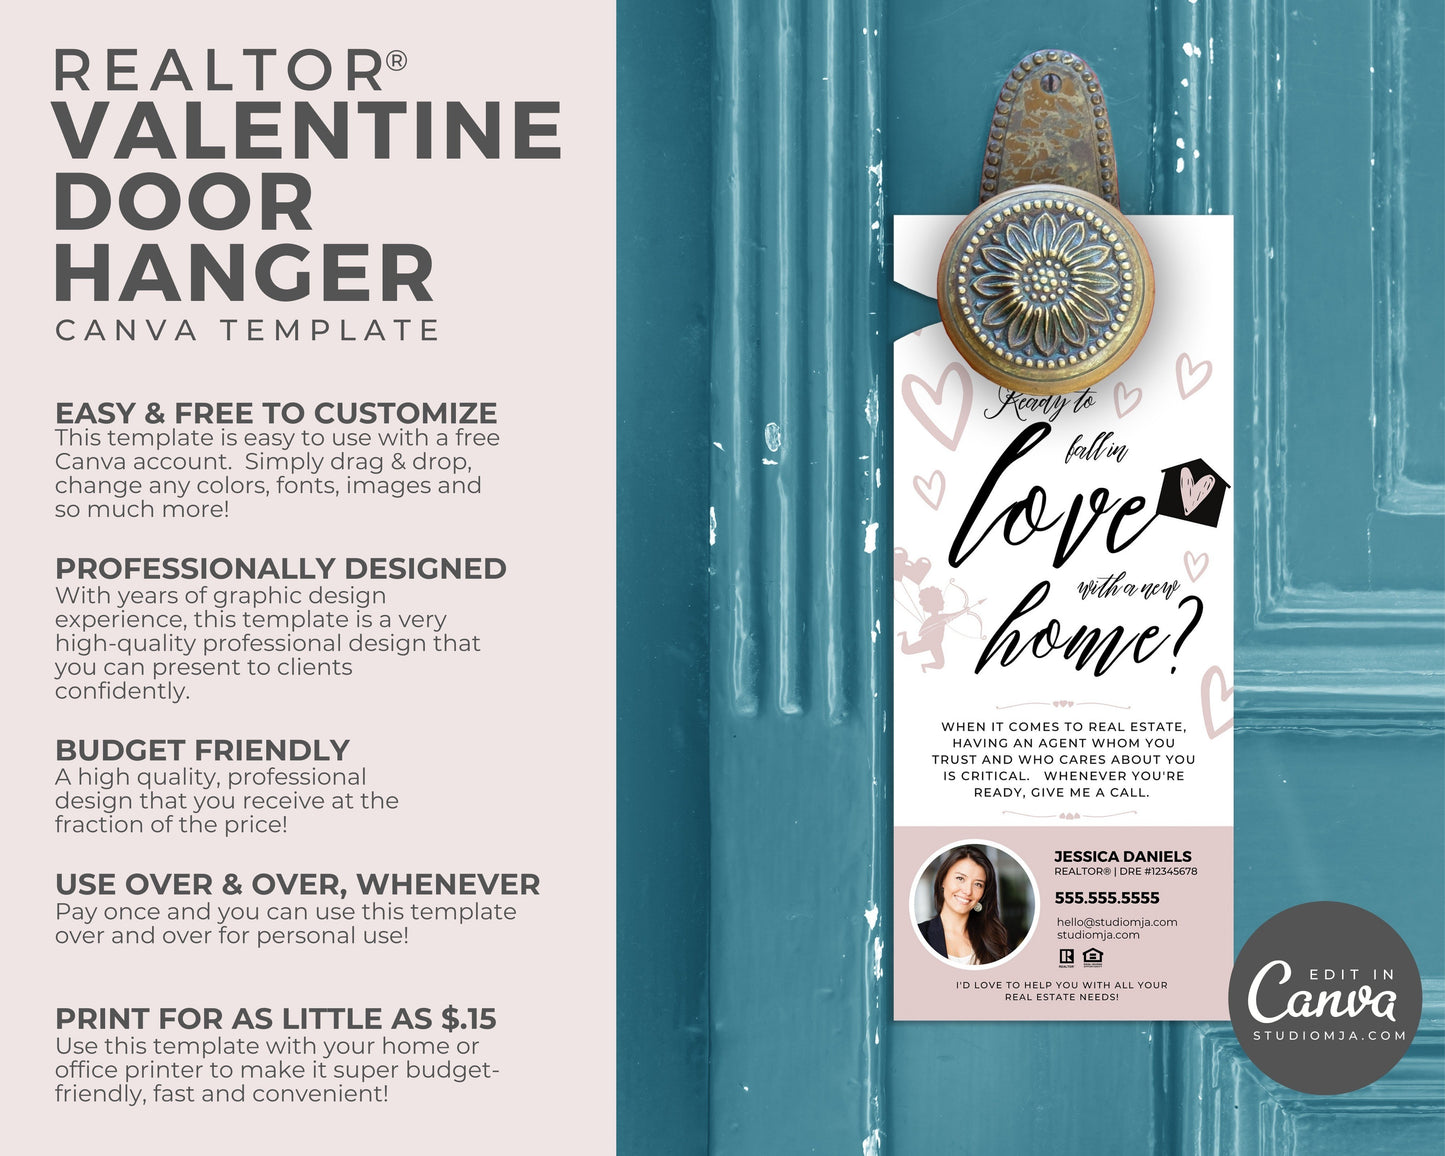 Real Estate Door Hanger | Ready To Fall In Love With a New Home